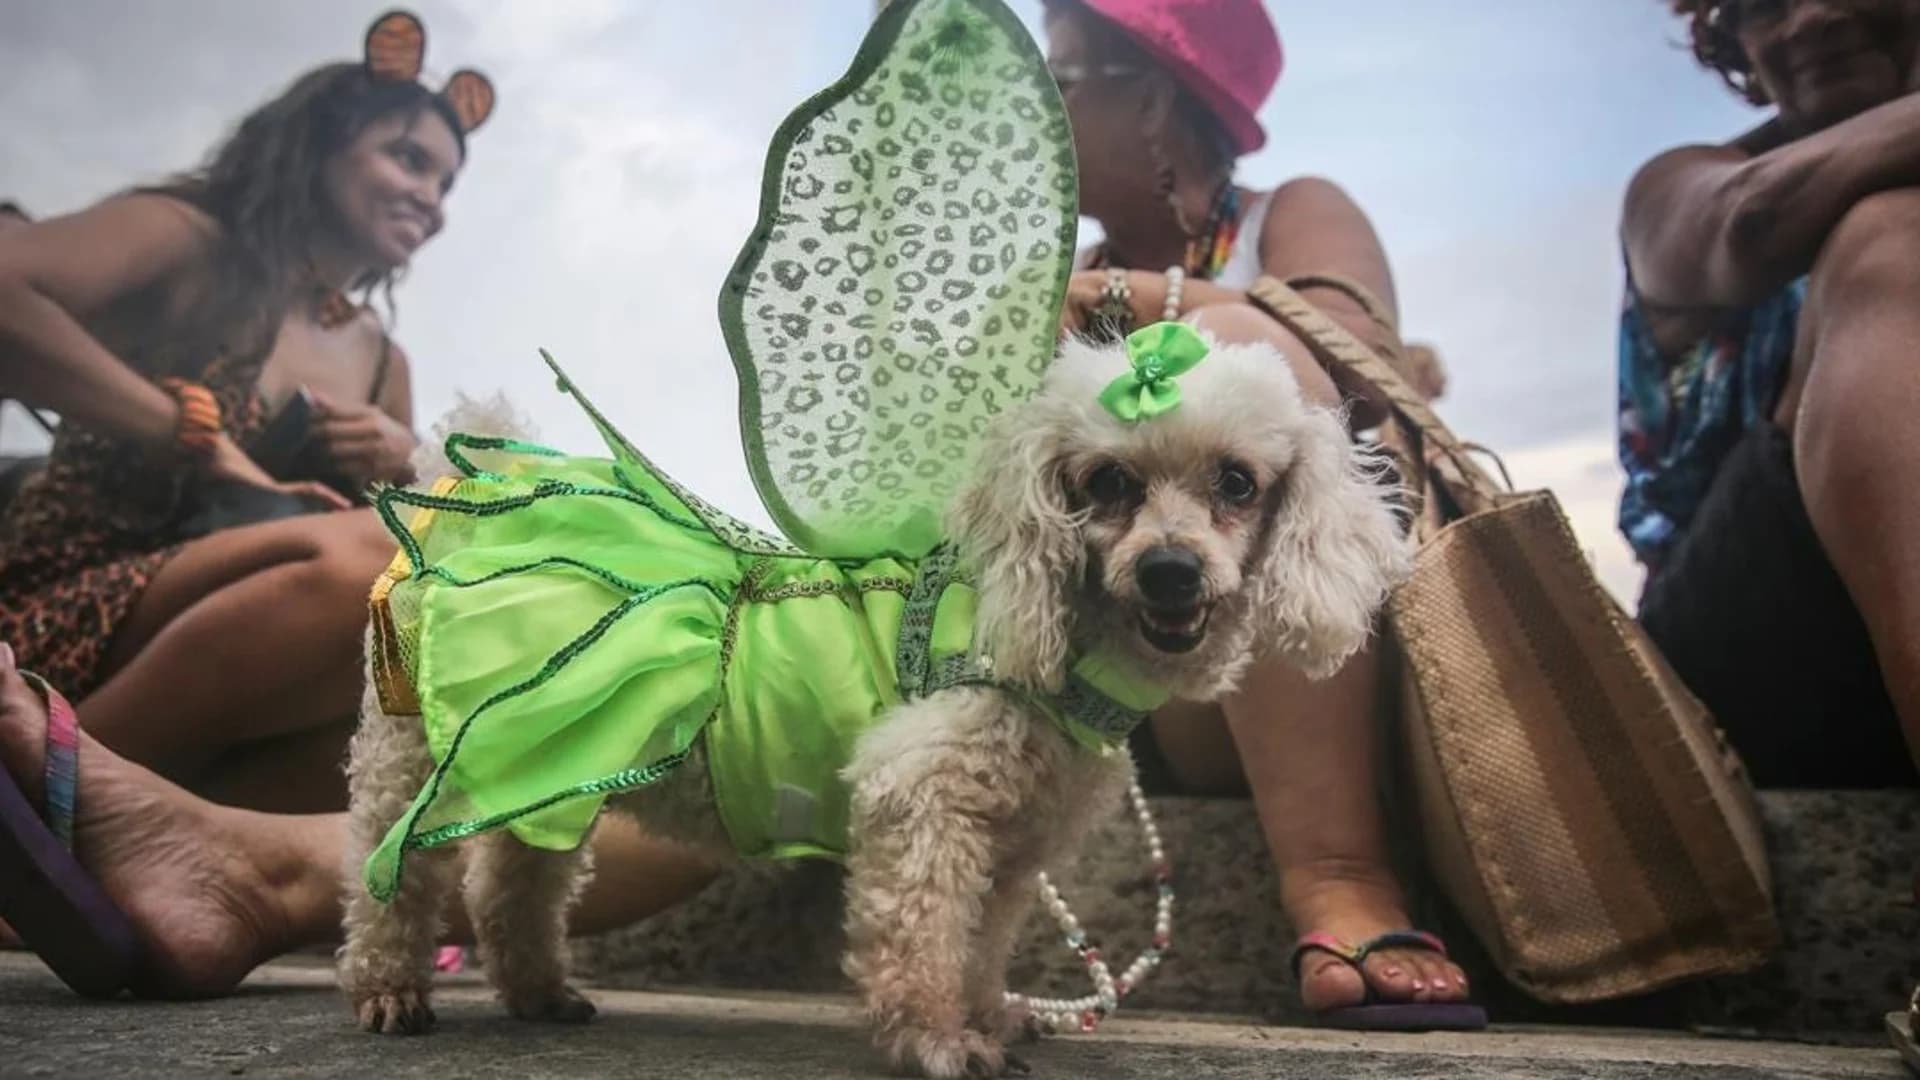 Poll: National Dress Up Your Pet Day